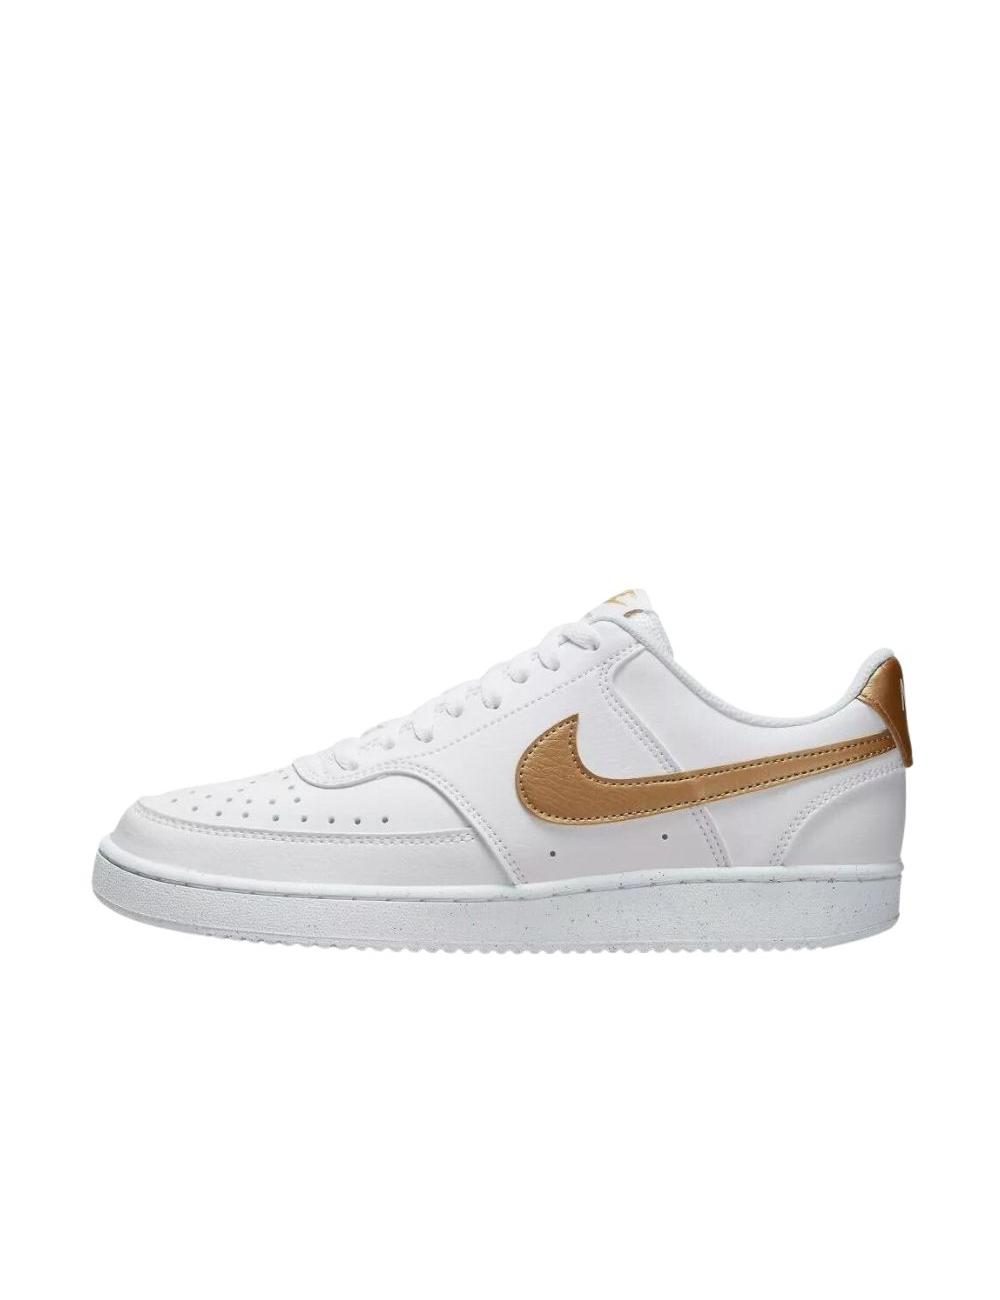 DEPORTIVA MUJER NIKE COURT VISION LOW NN DH3158 105